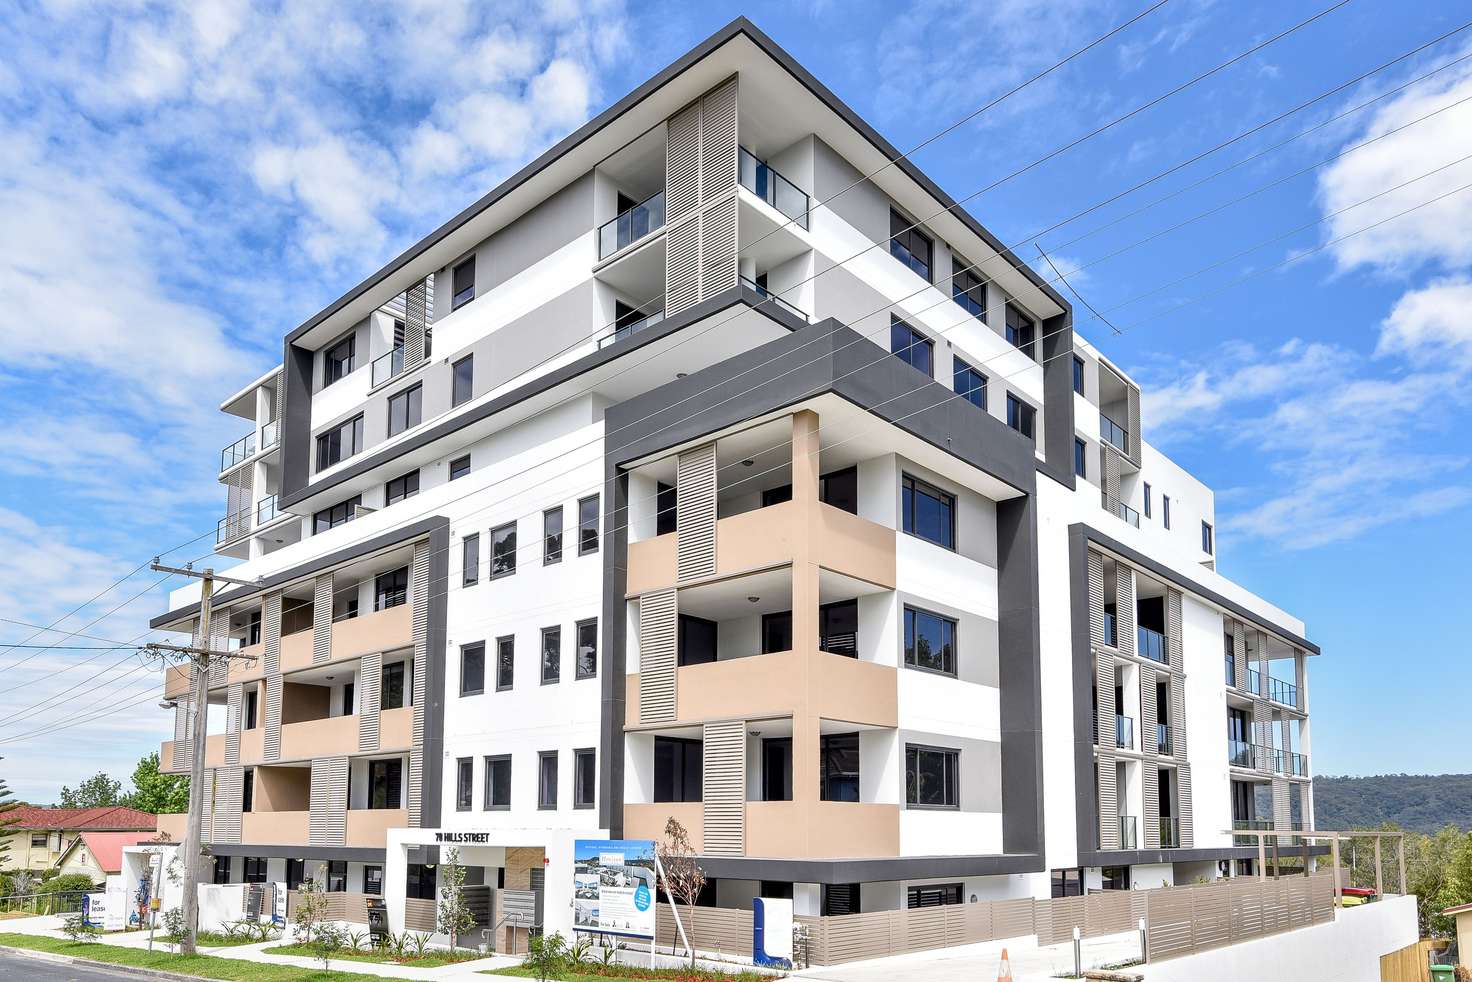 Main view of Homely apartment listing, 11/66-70 Hills Street, Gosford NSW 2250